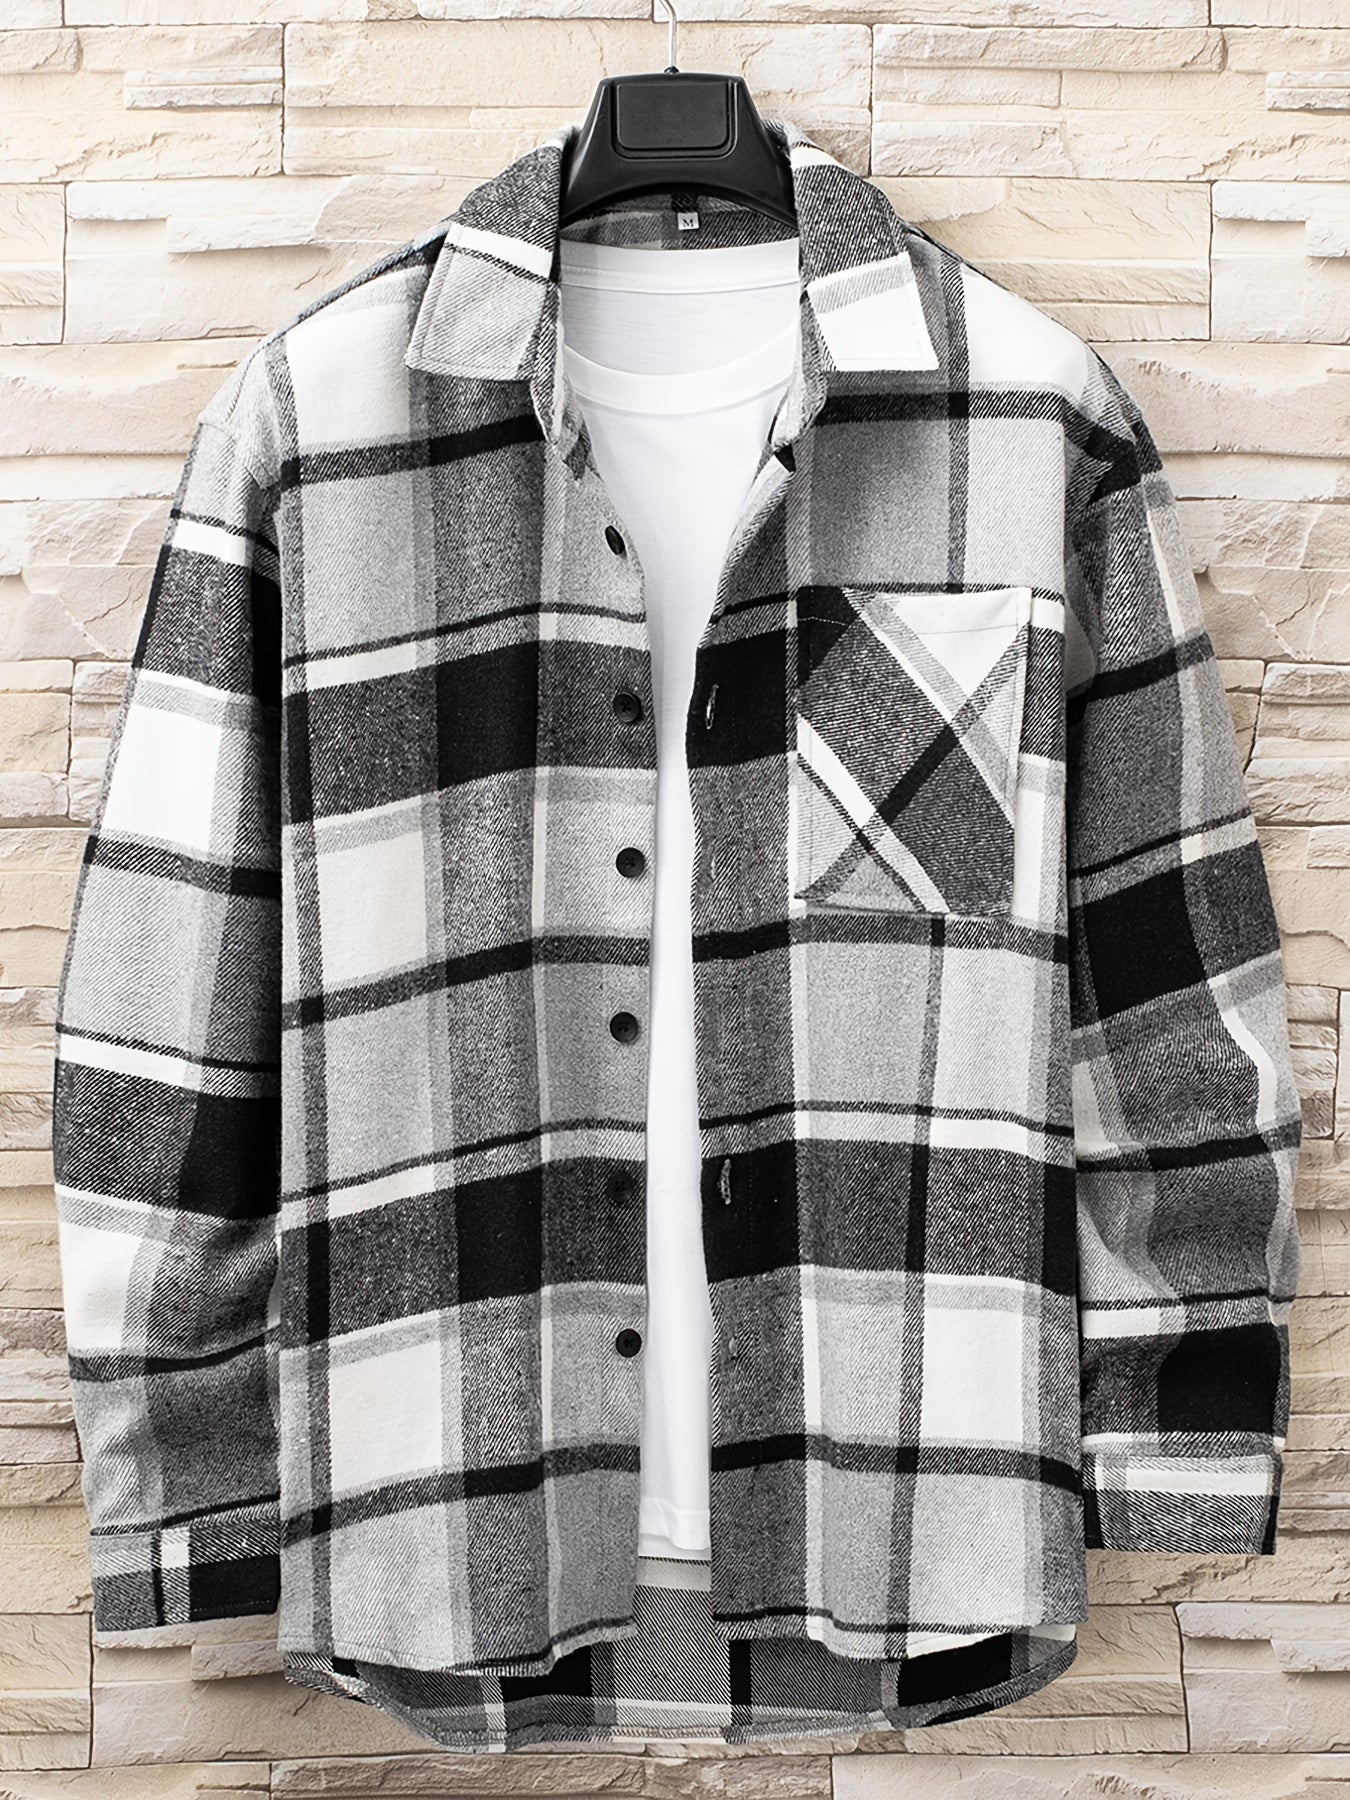 Men's Plaid Casual Shirt with Button Closure - Regular Fit for Everyday Wear